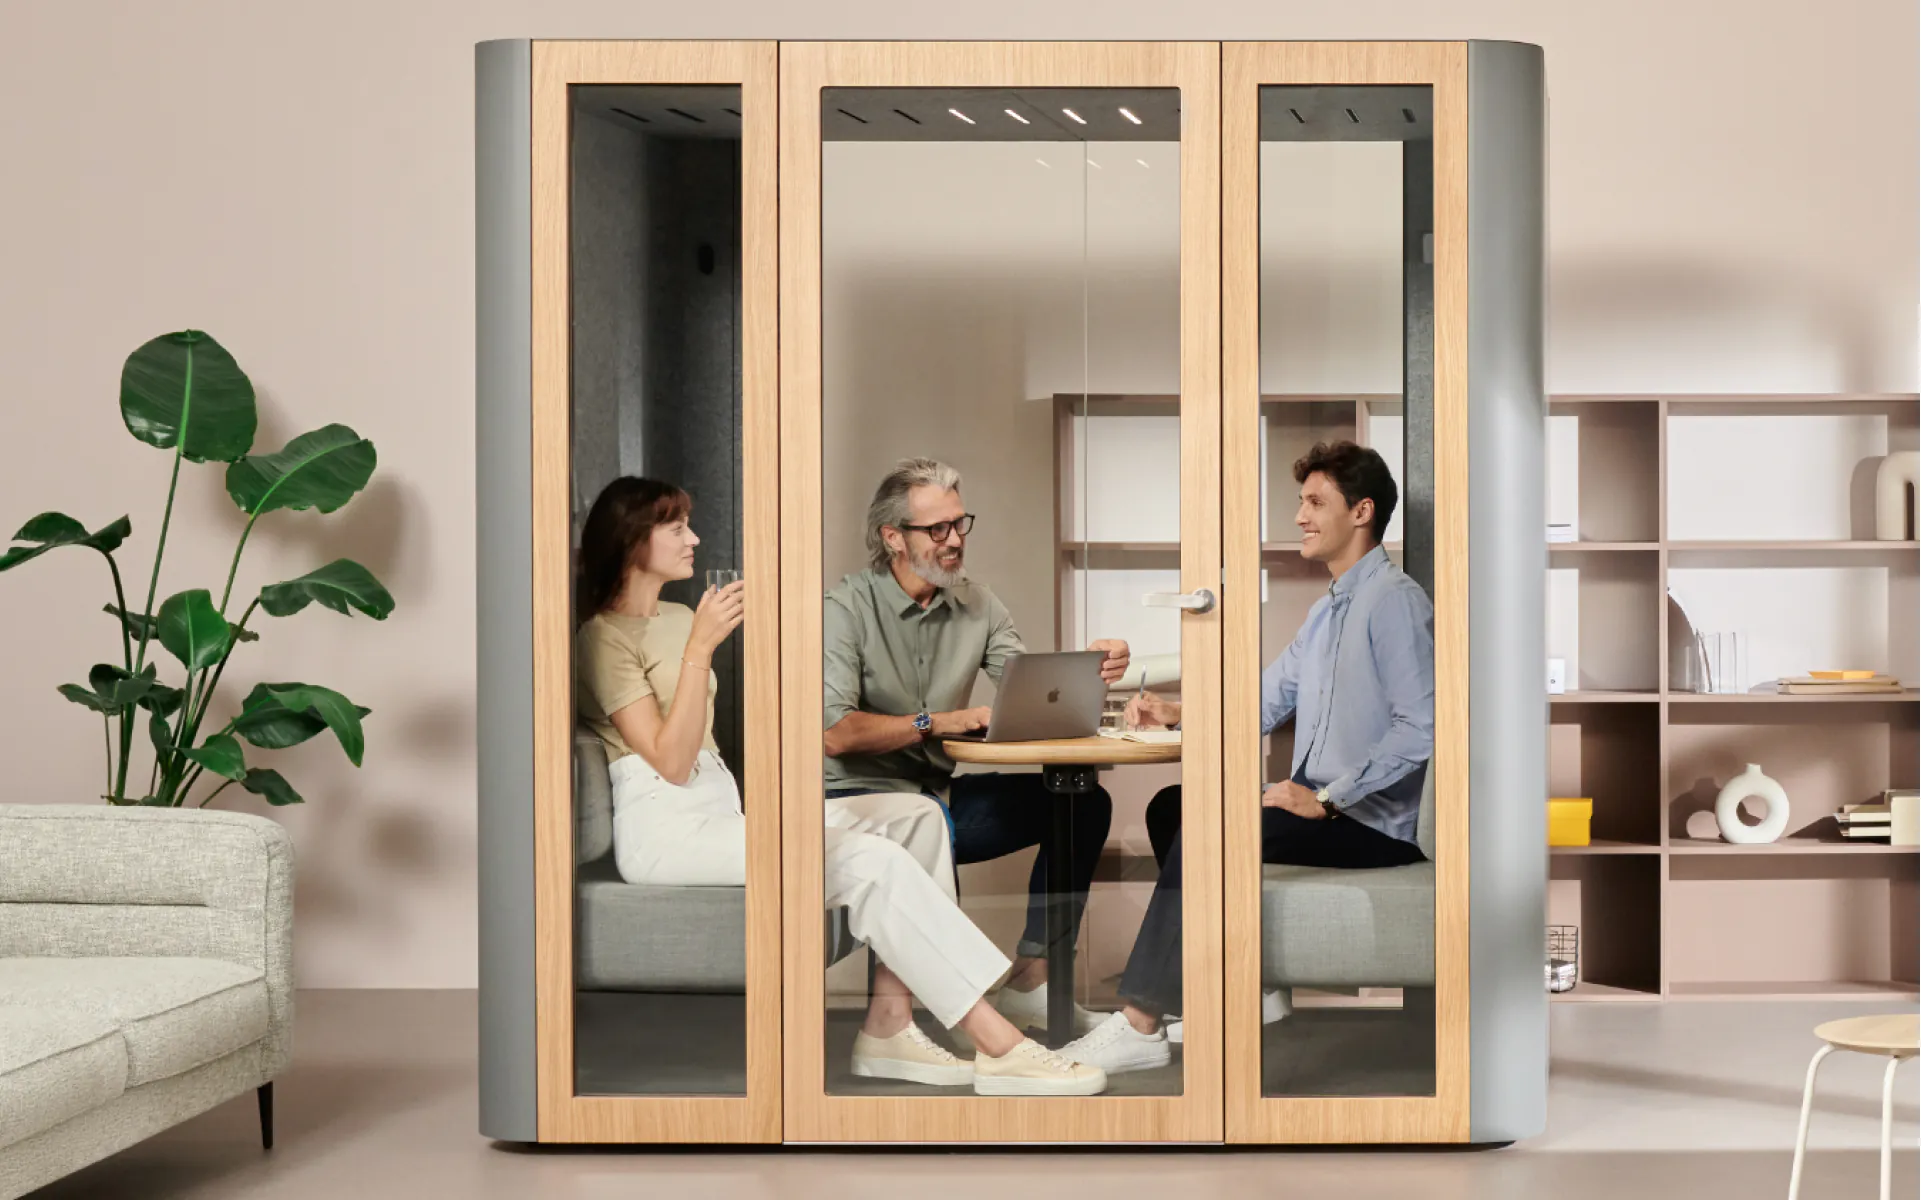 Space Pod by Mute Meeting for 4 people with sofas